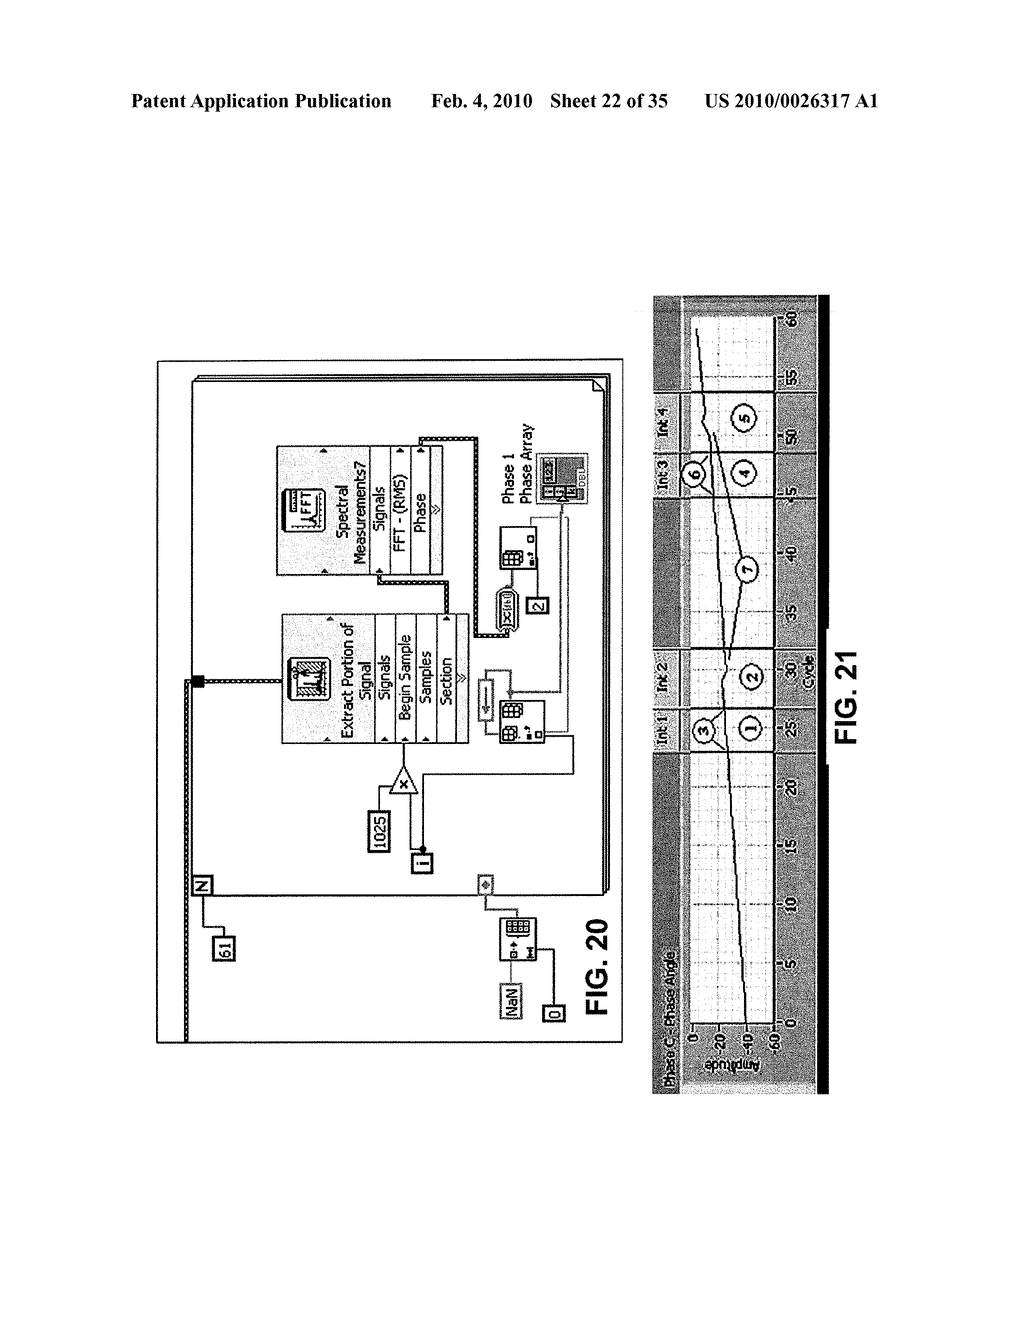 IMPEDANCE-BASED ARC FAULT DETERMINATION DEVICE (IADD) AND METHOD - diagram, schematic, and image 23